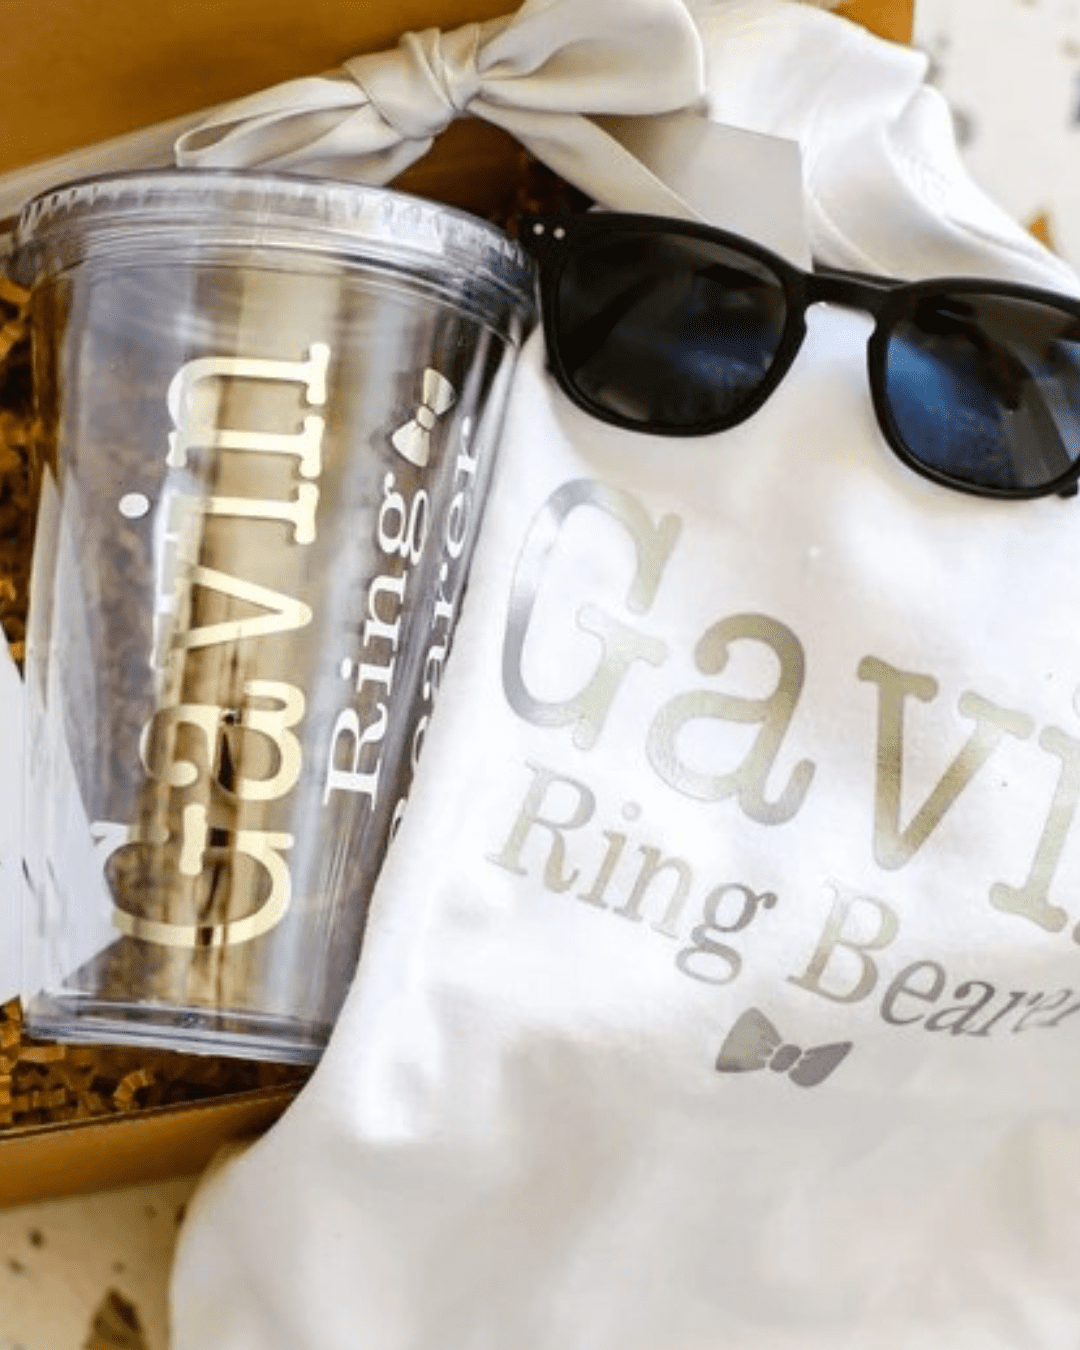 ring bearer proposal gifts water bottle and glasses set